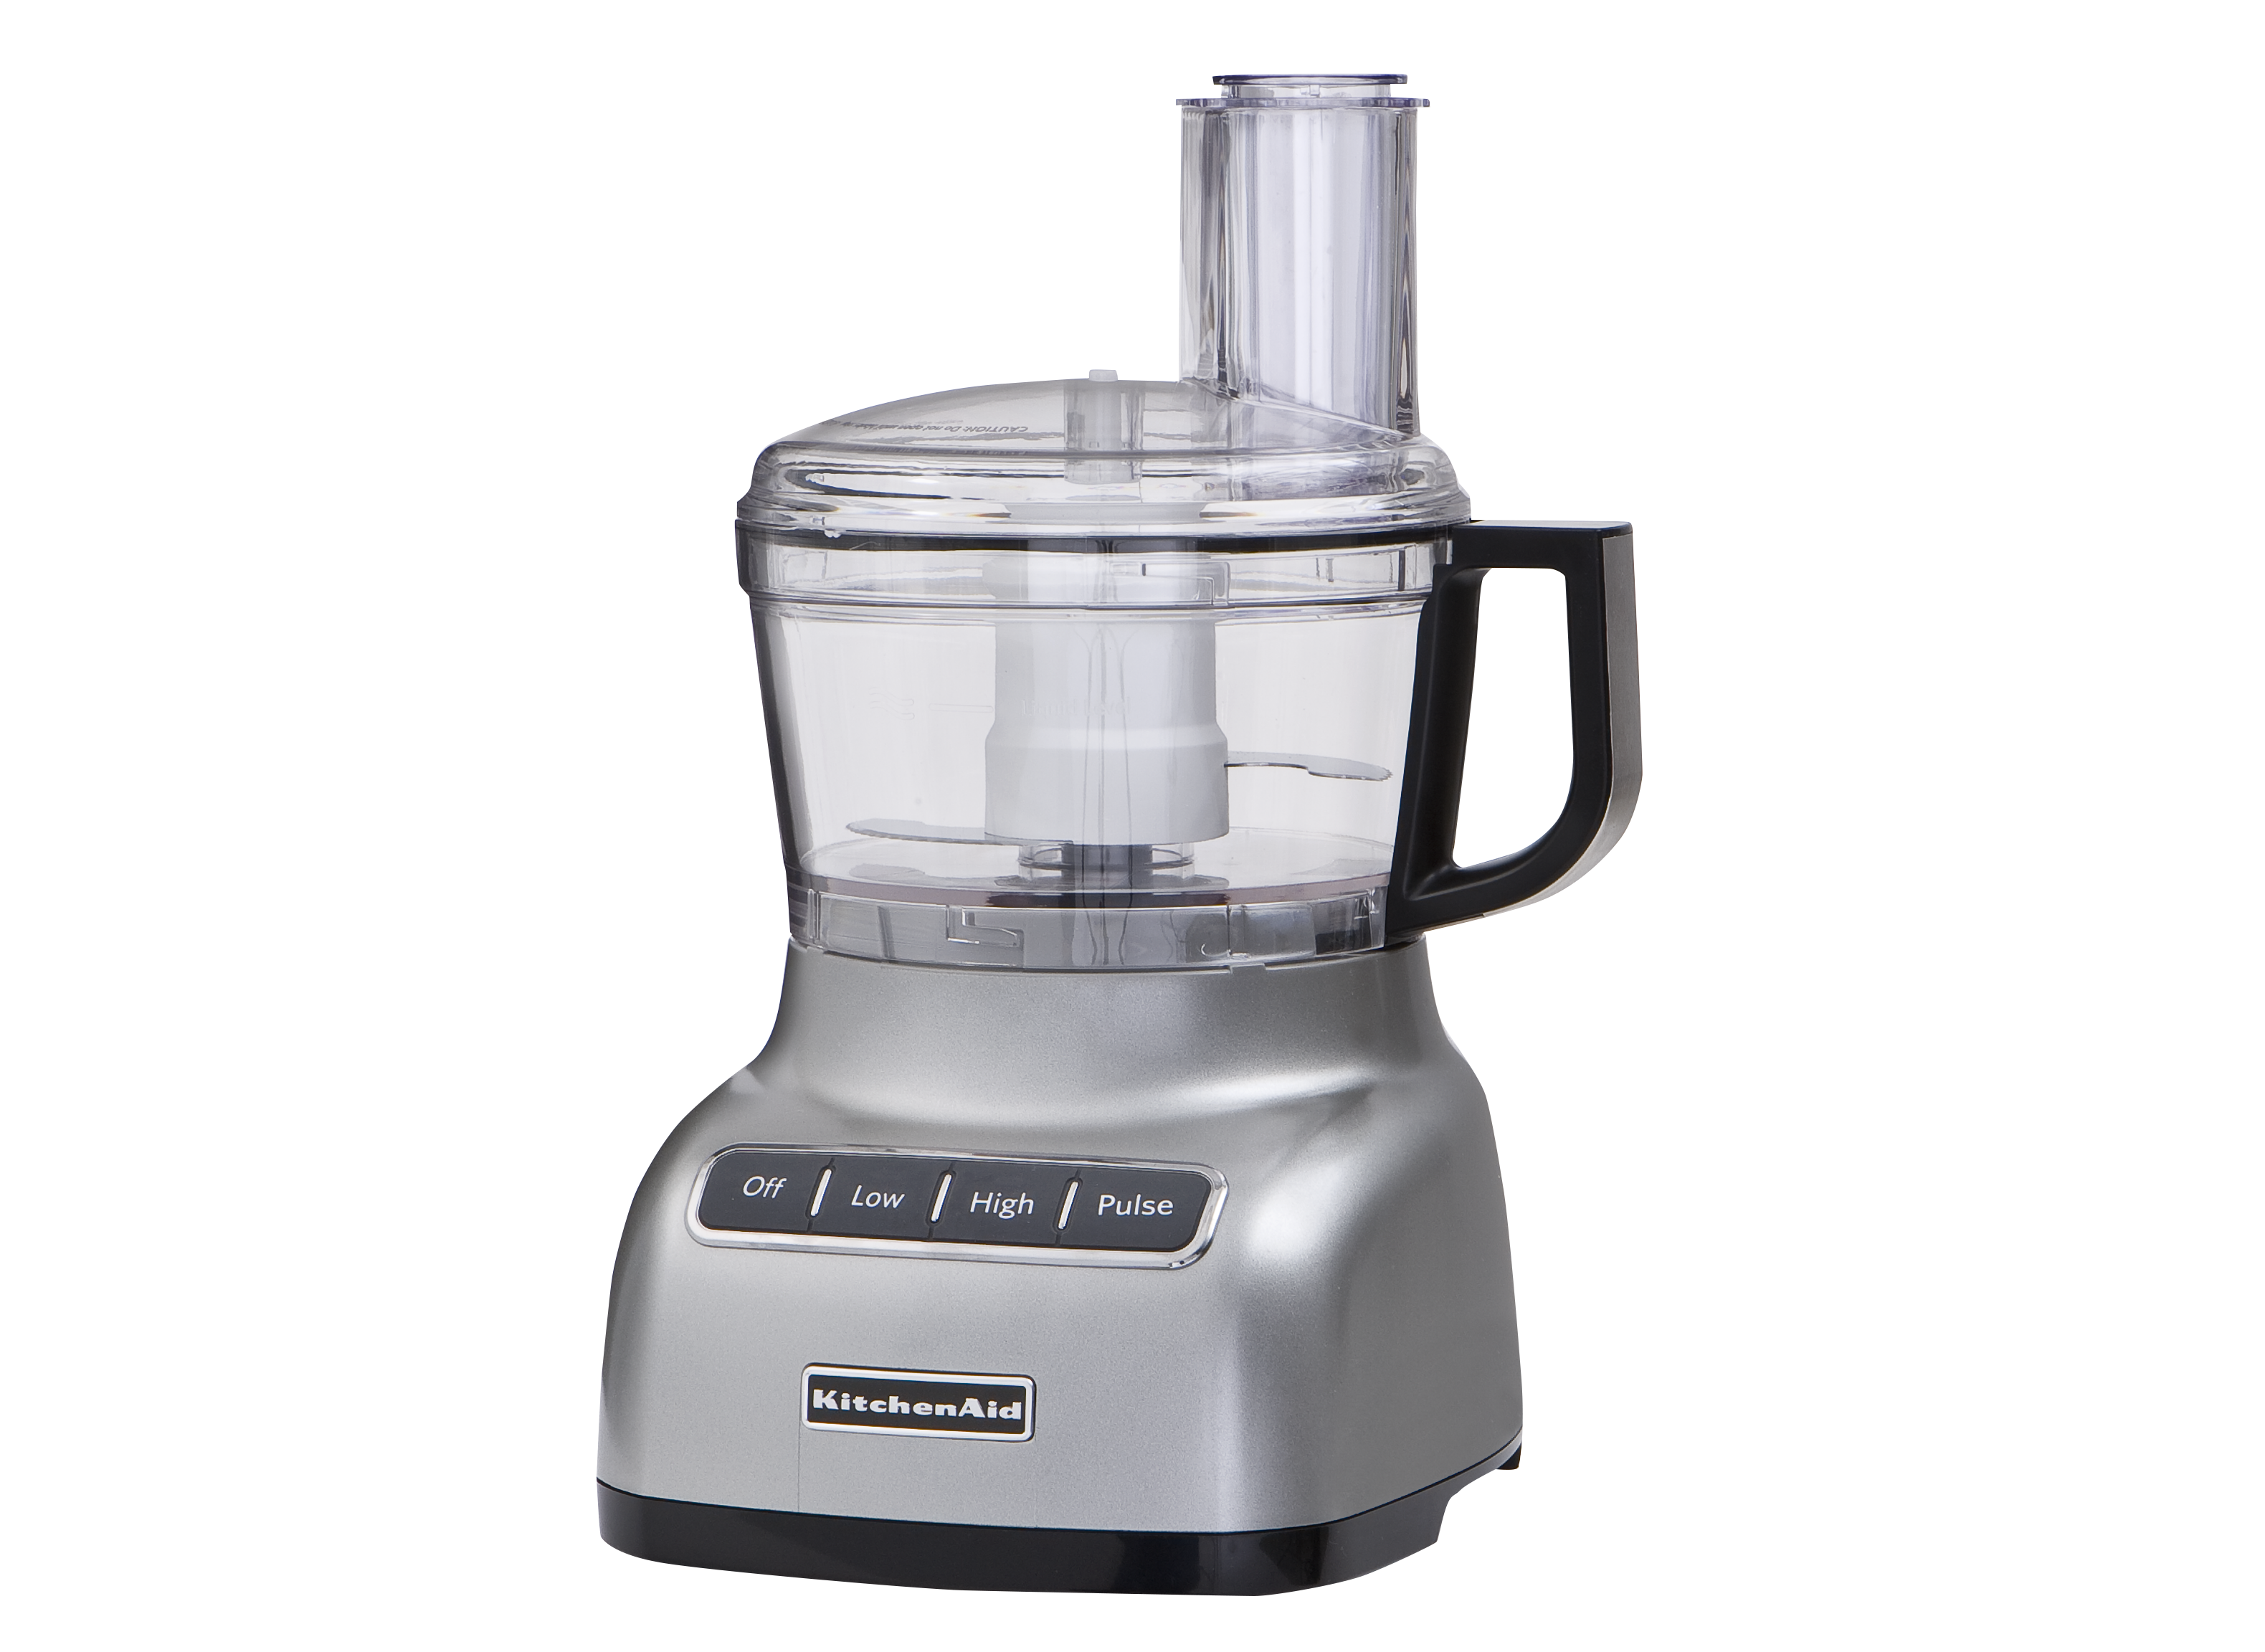 https://crdms.images.consumerreports.org/prod/products/cr/models/248900-foodprocessors-kitchenaid-7cupkfp0711.png